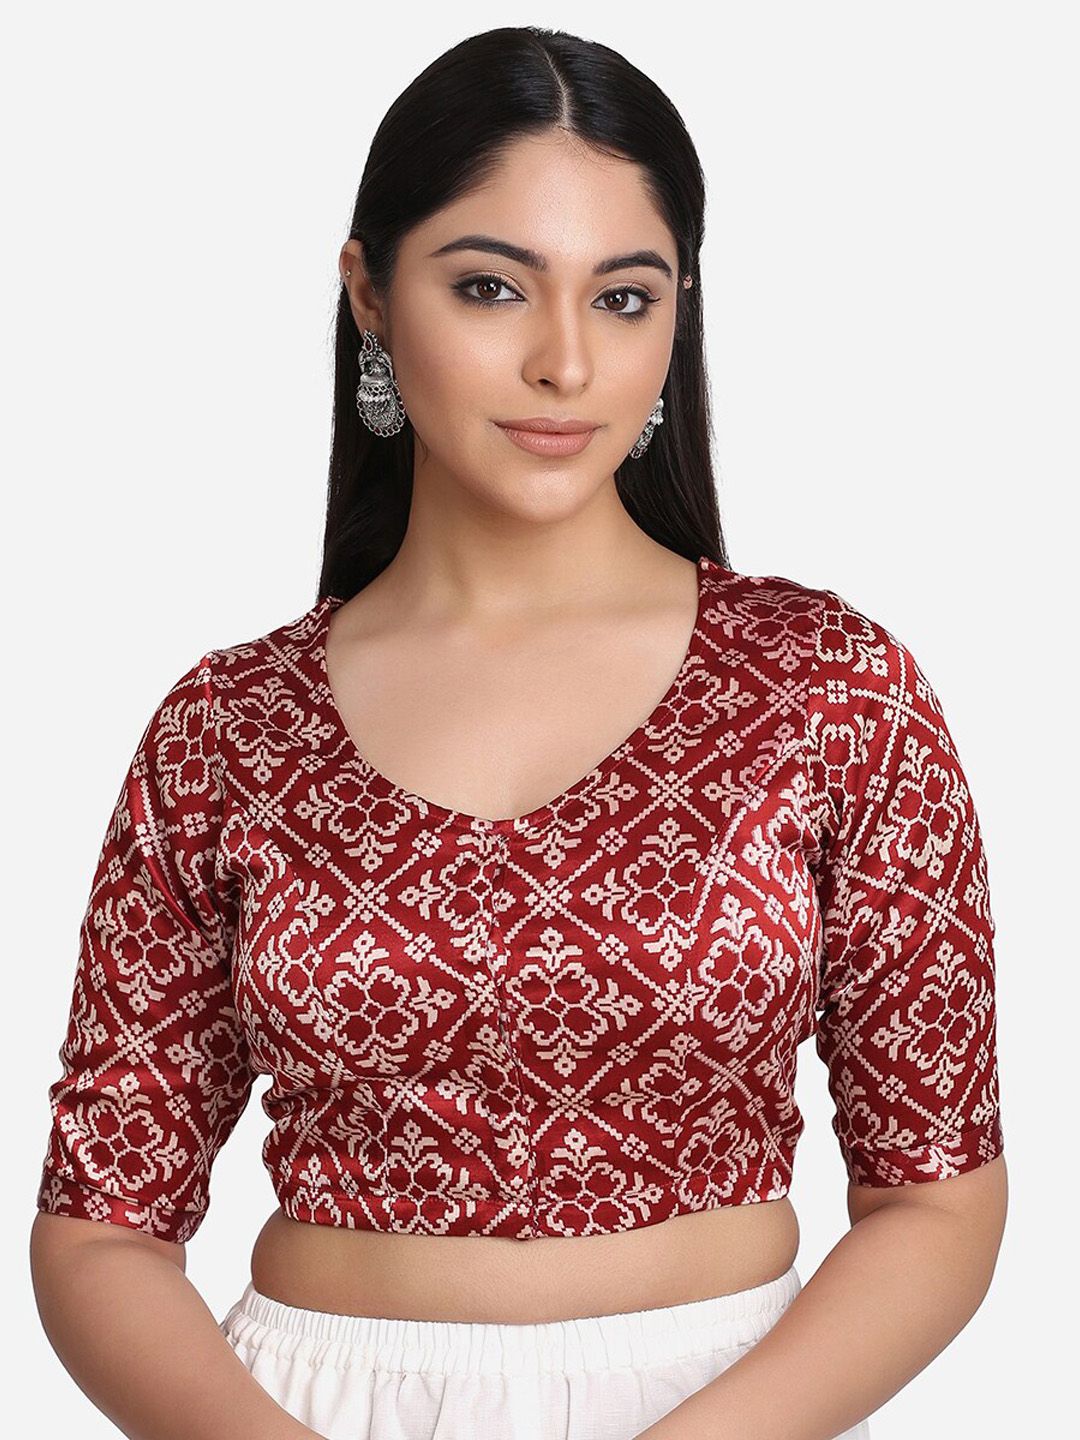 THE WEAVE TRAVELLER Women Maroon & White Printed Readymade Cotton Saree Blouse Price in India